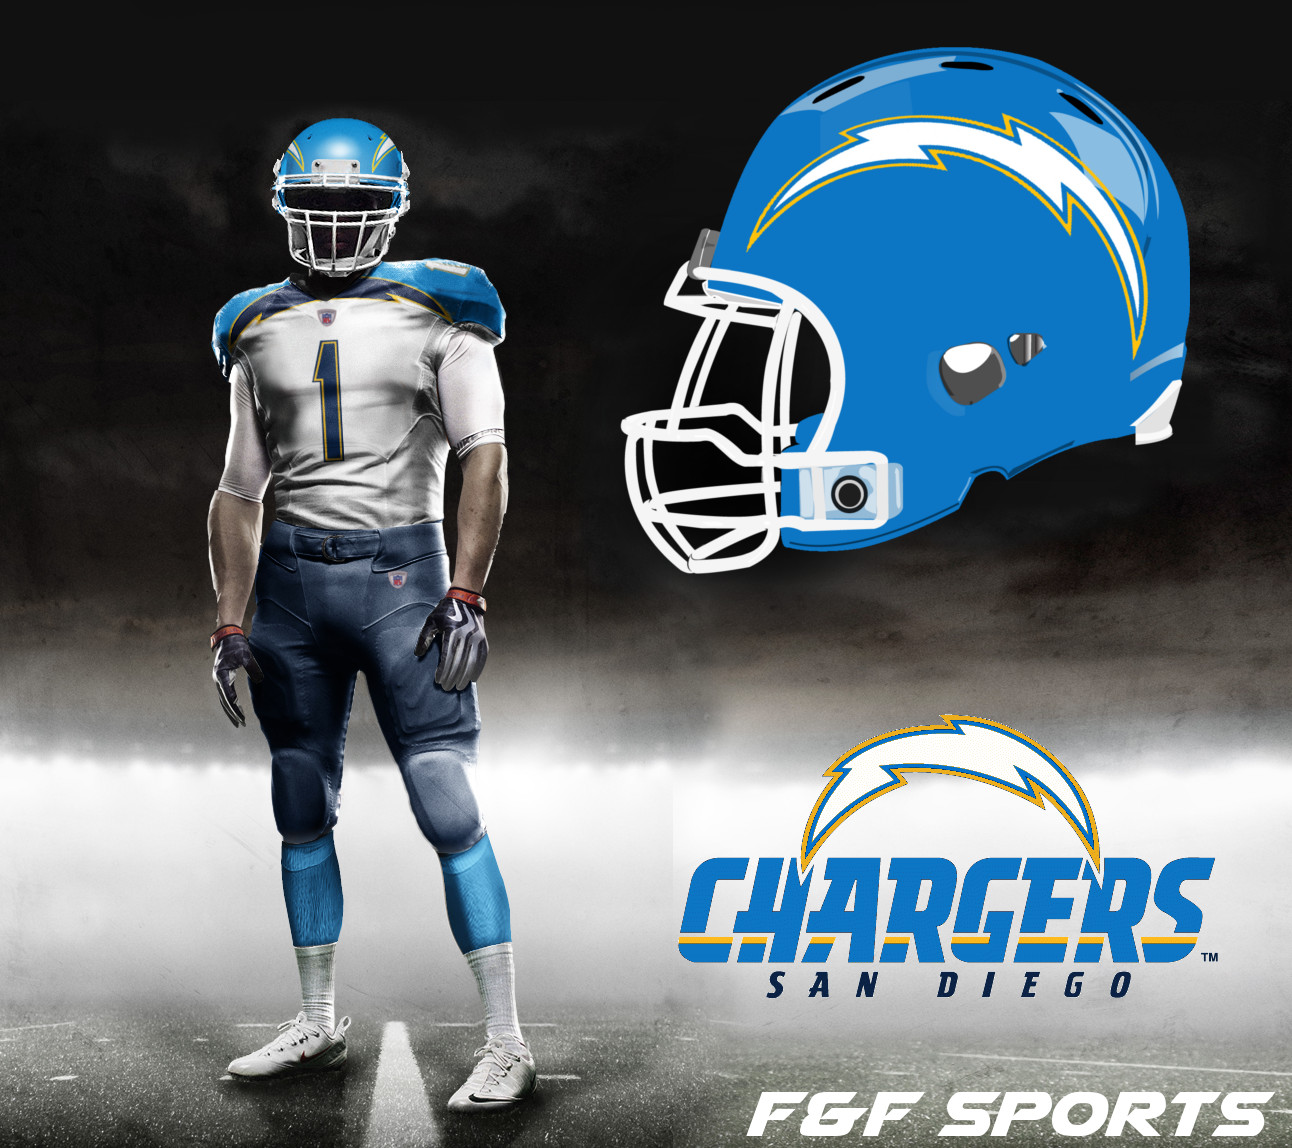 chargers-concept-away.jpg